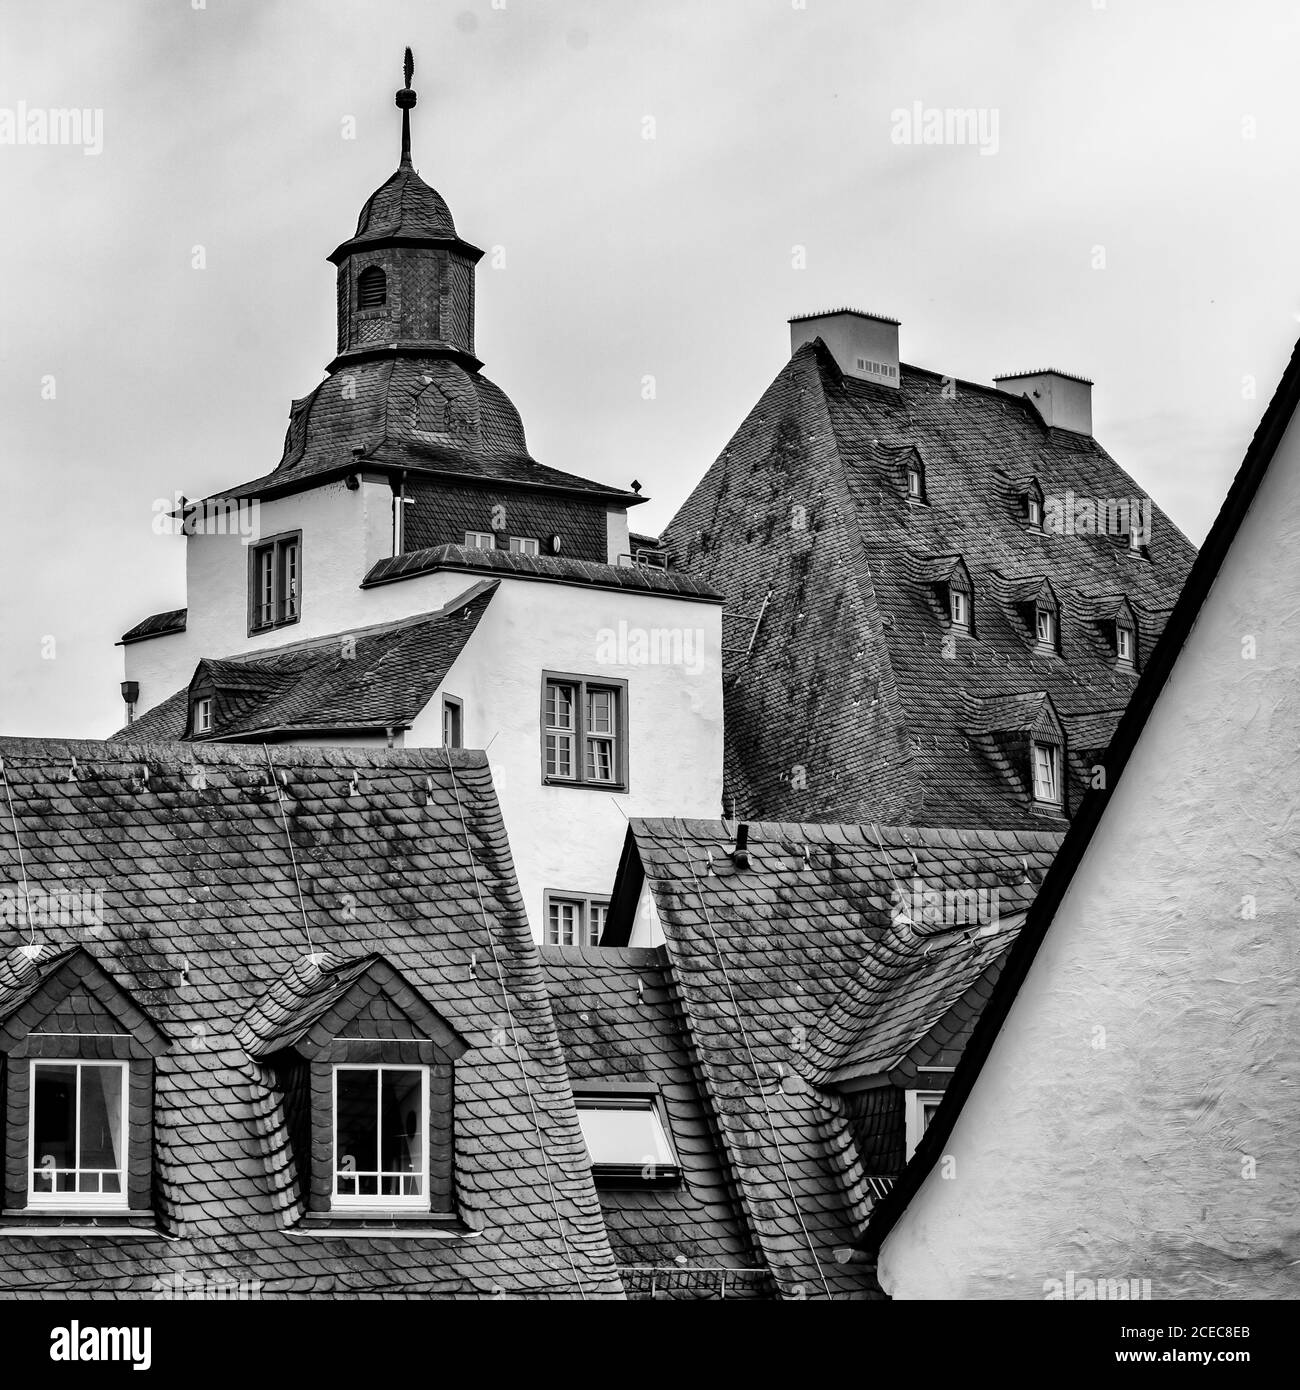 A view of the well-kept old town buildings and roofs in the city center of Limburg Stock Photo